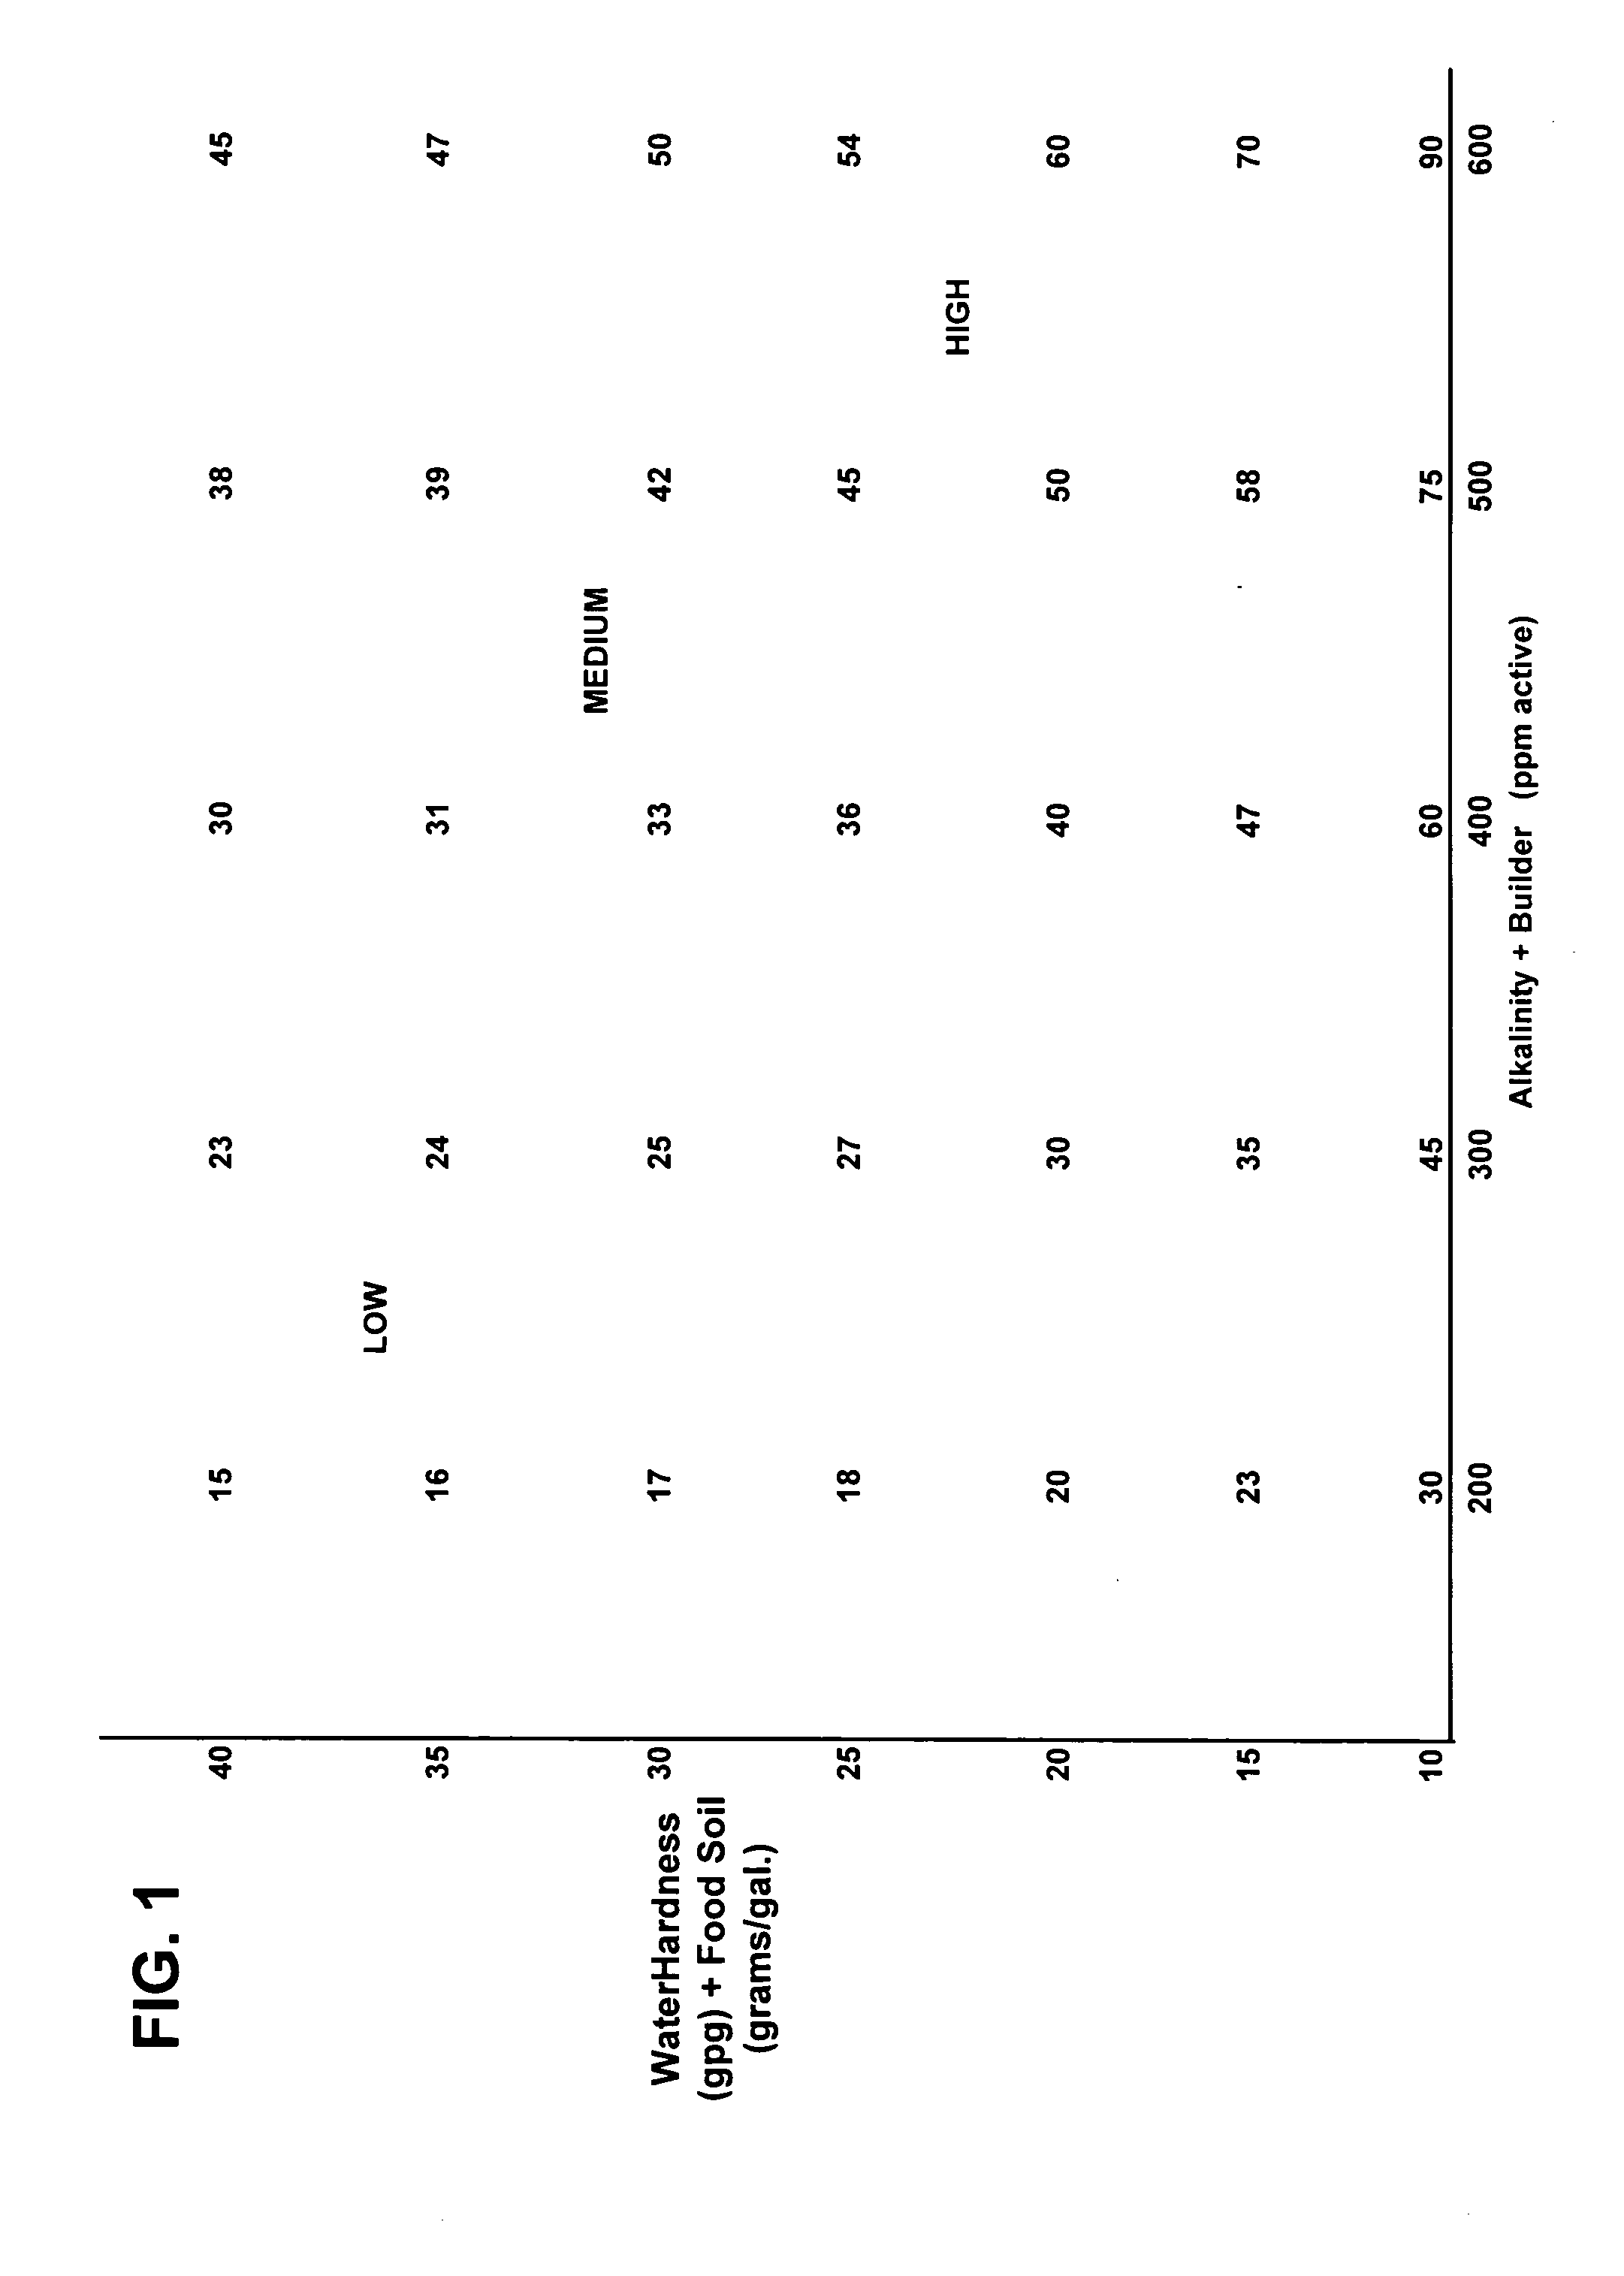 Warewashing composition for use in automatic dishwashing machines, and methods for manufacturing and using